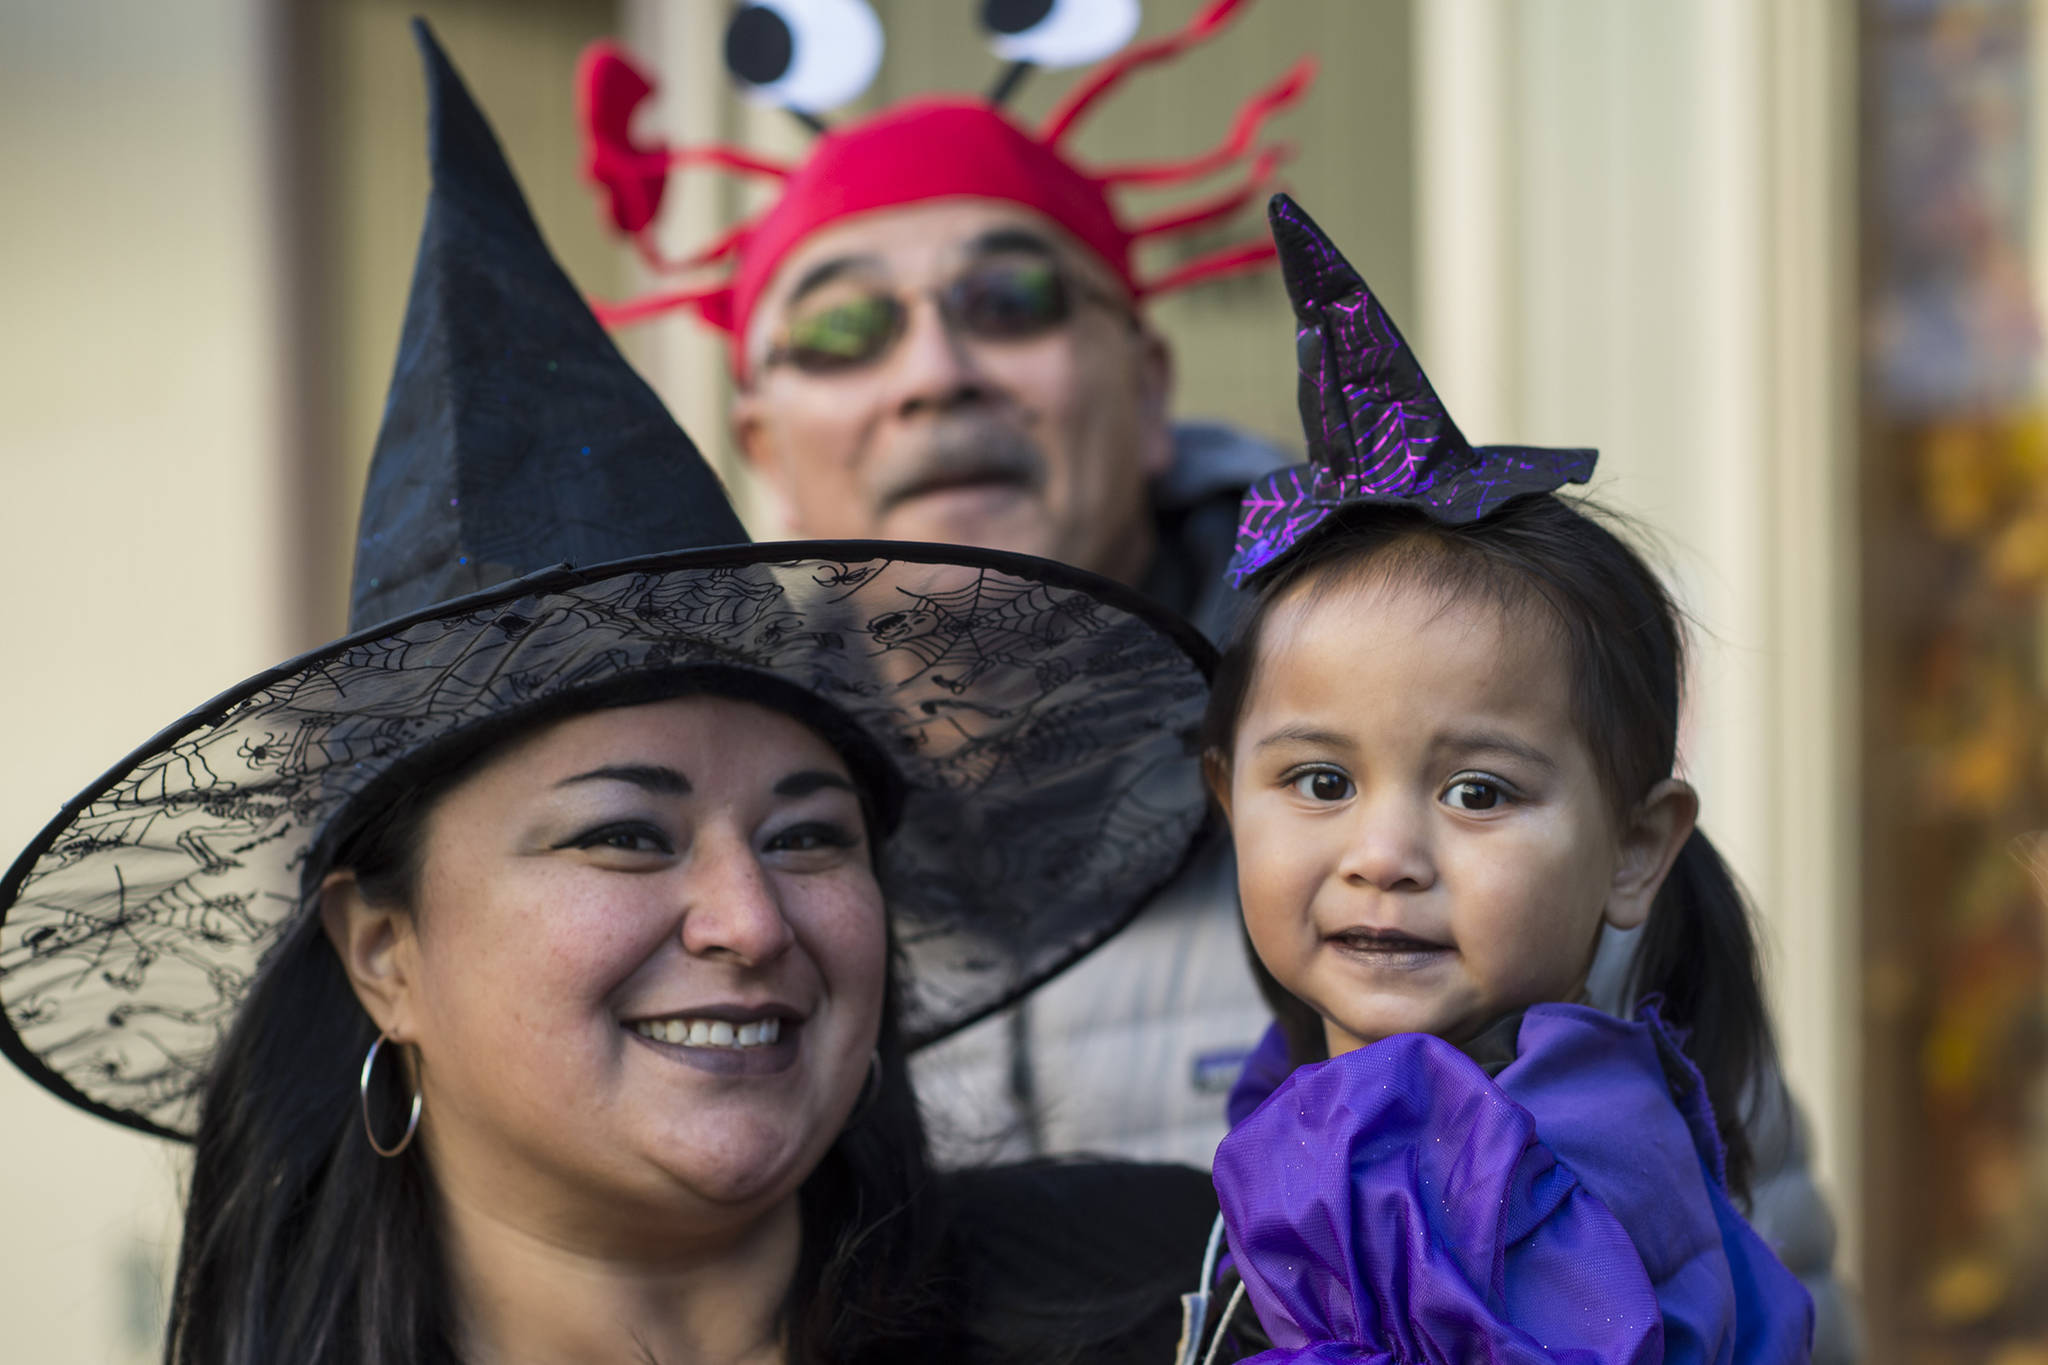 Shakira Vallejo holds her daughter, Gabriela, 3, as father and grandfather, Patrick Vallejo, photo bombs their picture while visiting merchants downtown for Halloween on Wednesday, Oct. 31, 2018. For the fourth year Kindred Post has organized the Halloween celebration for trick-or-treaters. (Michael Penn | Juneau Empire)